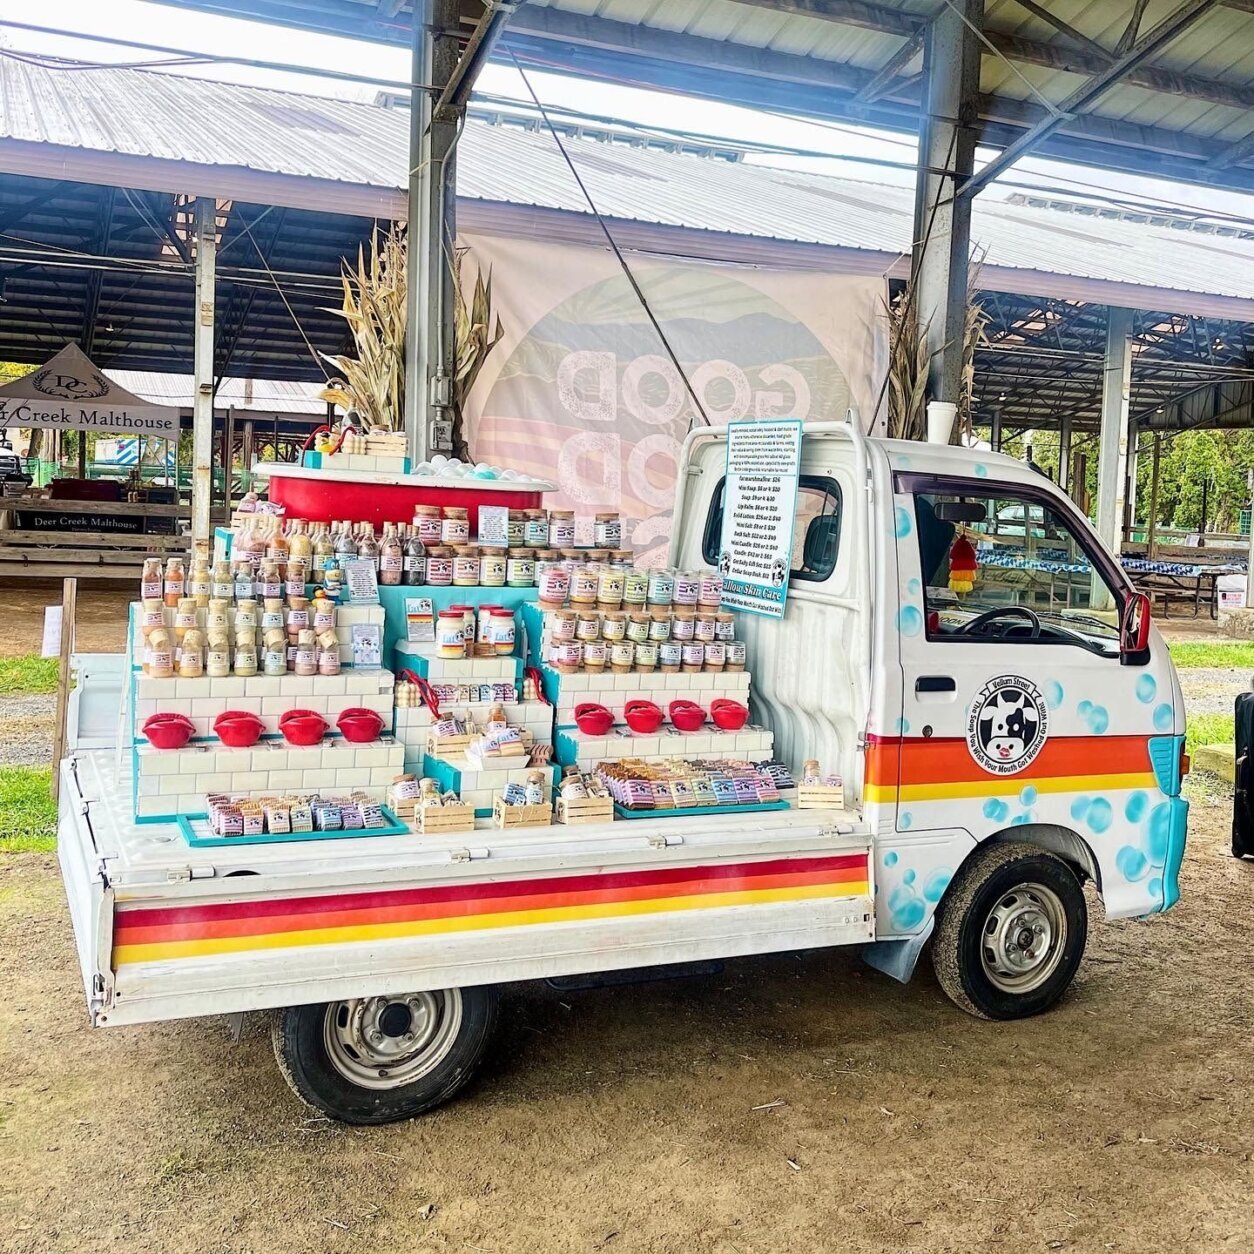 Melissa Torre, founder of soap and skincare company Vellum Street, customized her 1996 Daihatsu Hijet to match her branding.